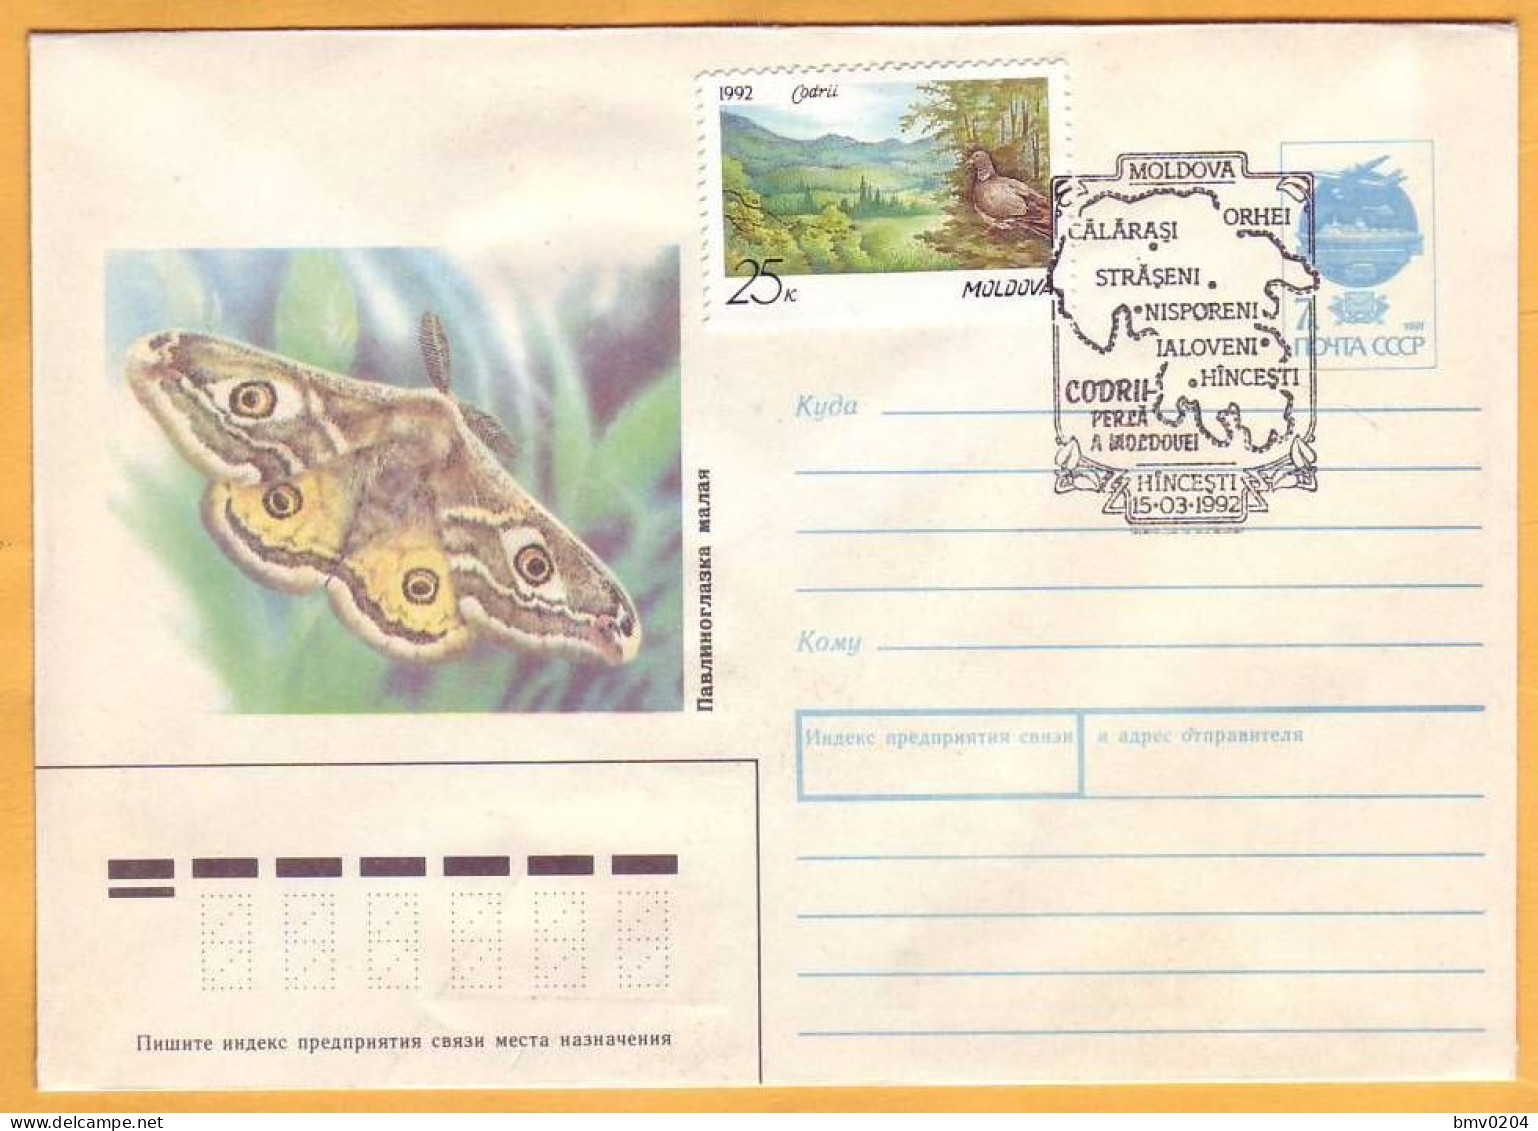 1992 Moldova Moldavie 3 Lots Special Cancellations Kodrii Moldova. Forest. Wood Pigeon Butterfly (1 Cover+2 Postcard) - Gallinaceans & Pheasants